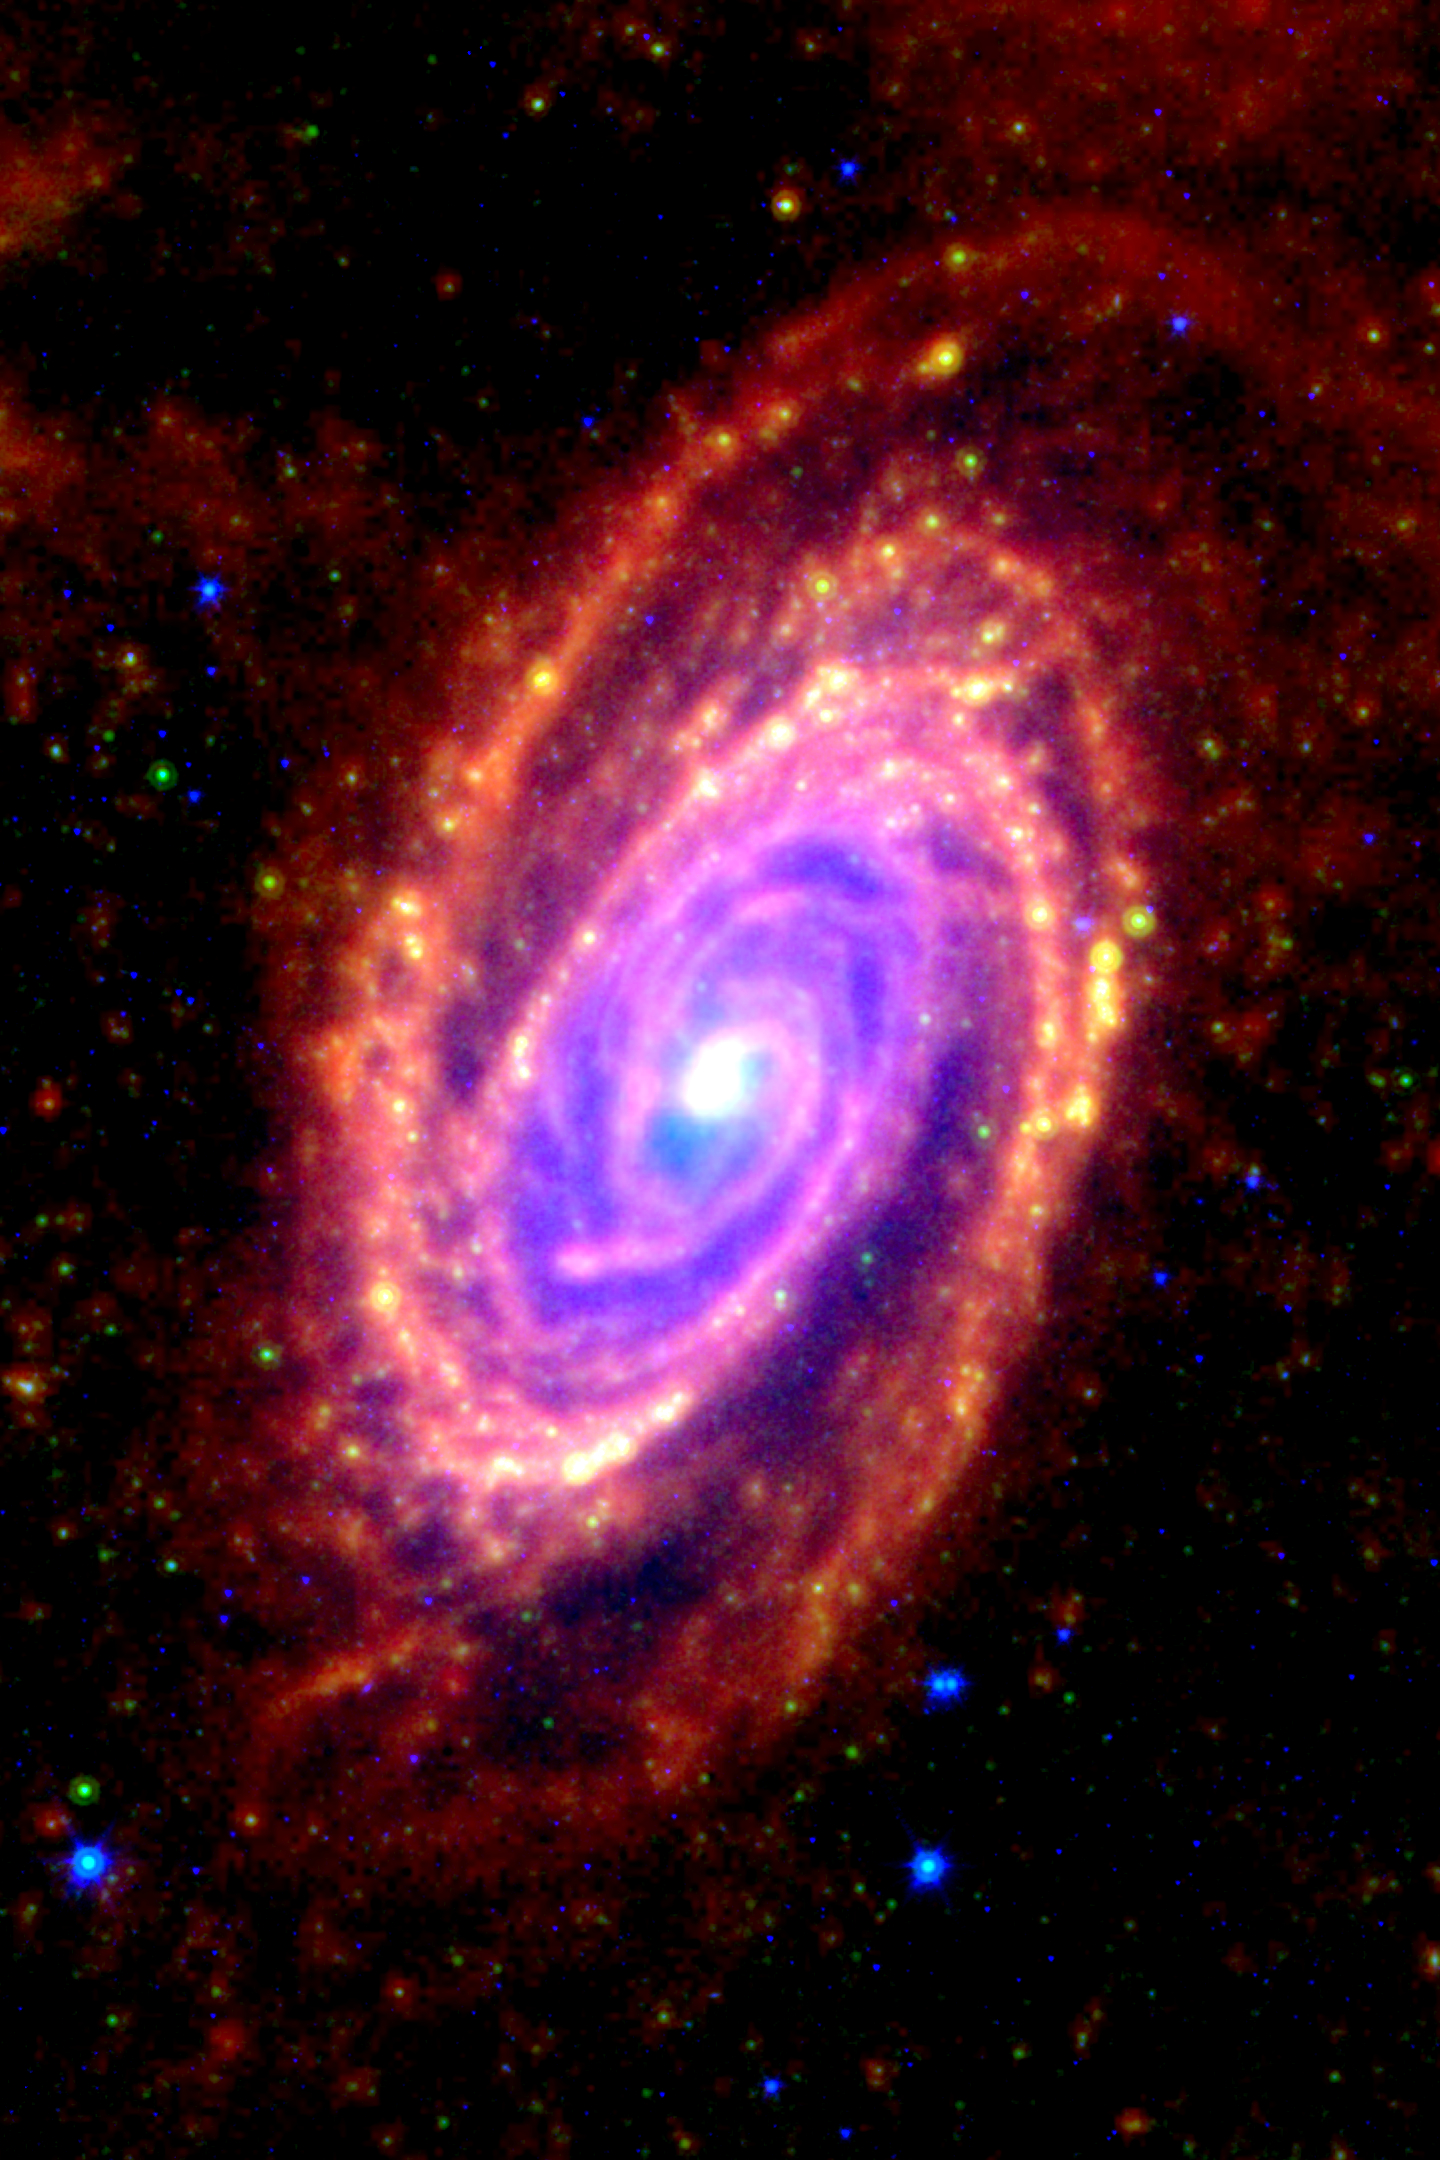 M81 (NGC 3031) as seen in the infrared